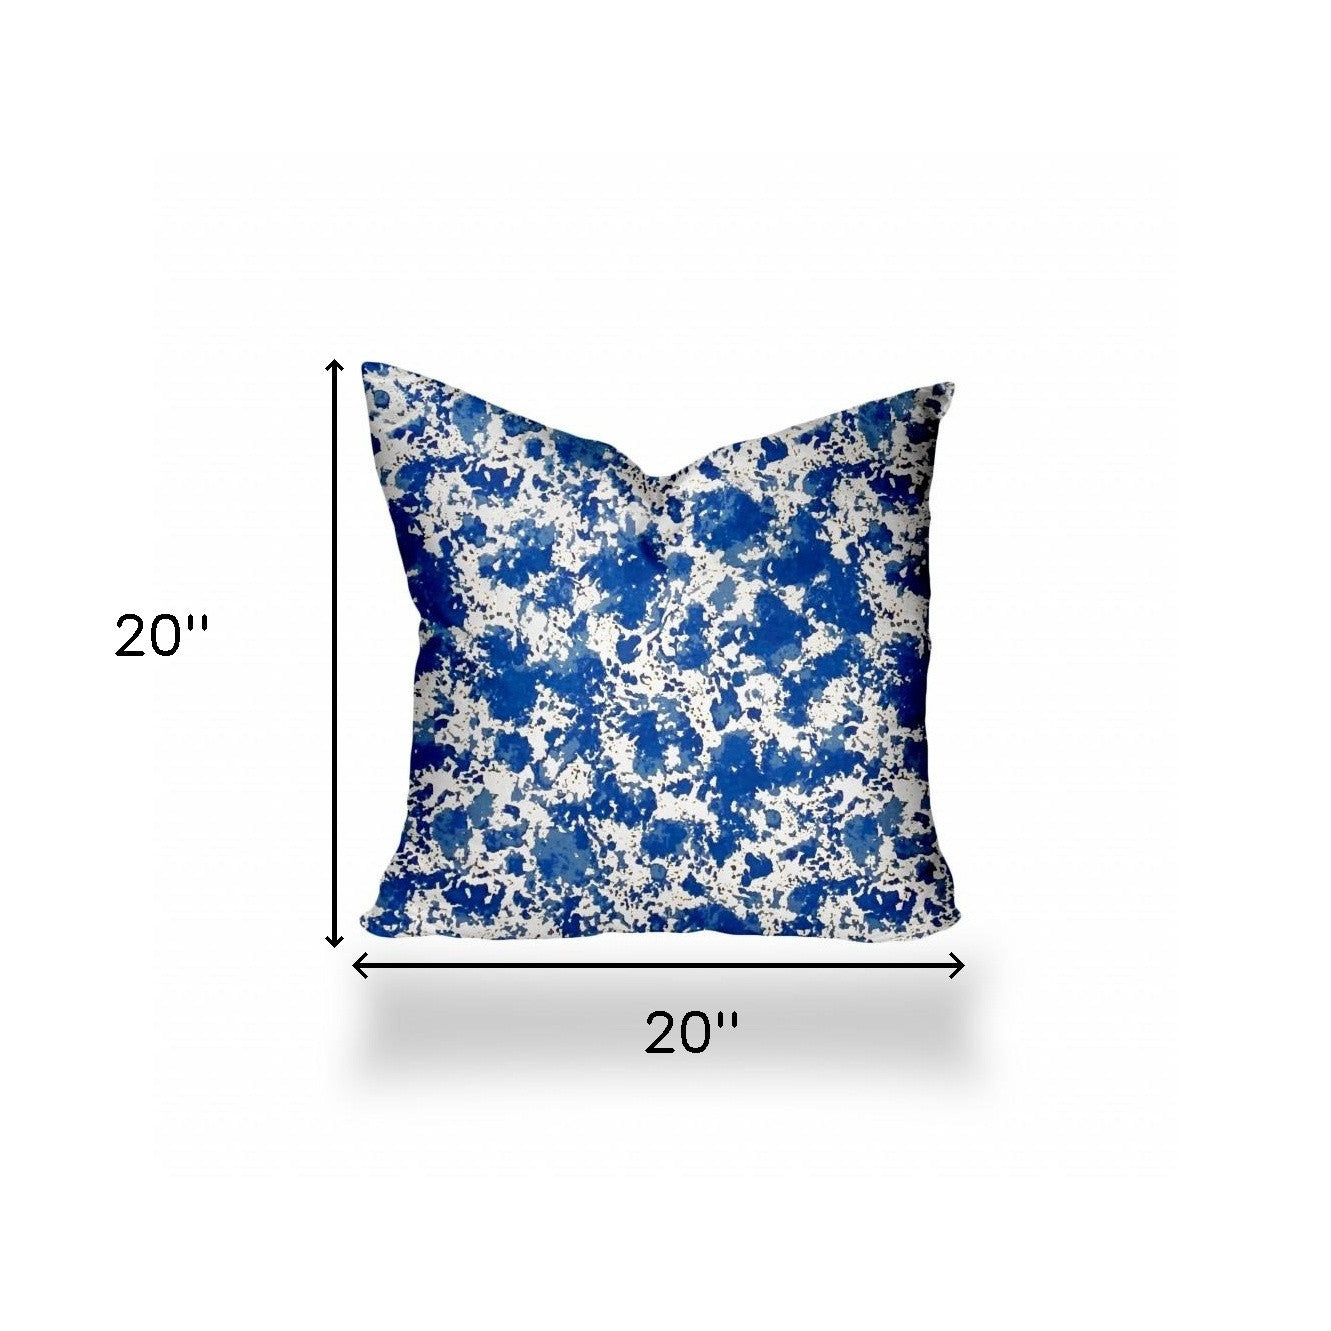 20" X 20" Blue And White Enveloped Coastal Throw Indoor Outdoor Pillow Cover